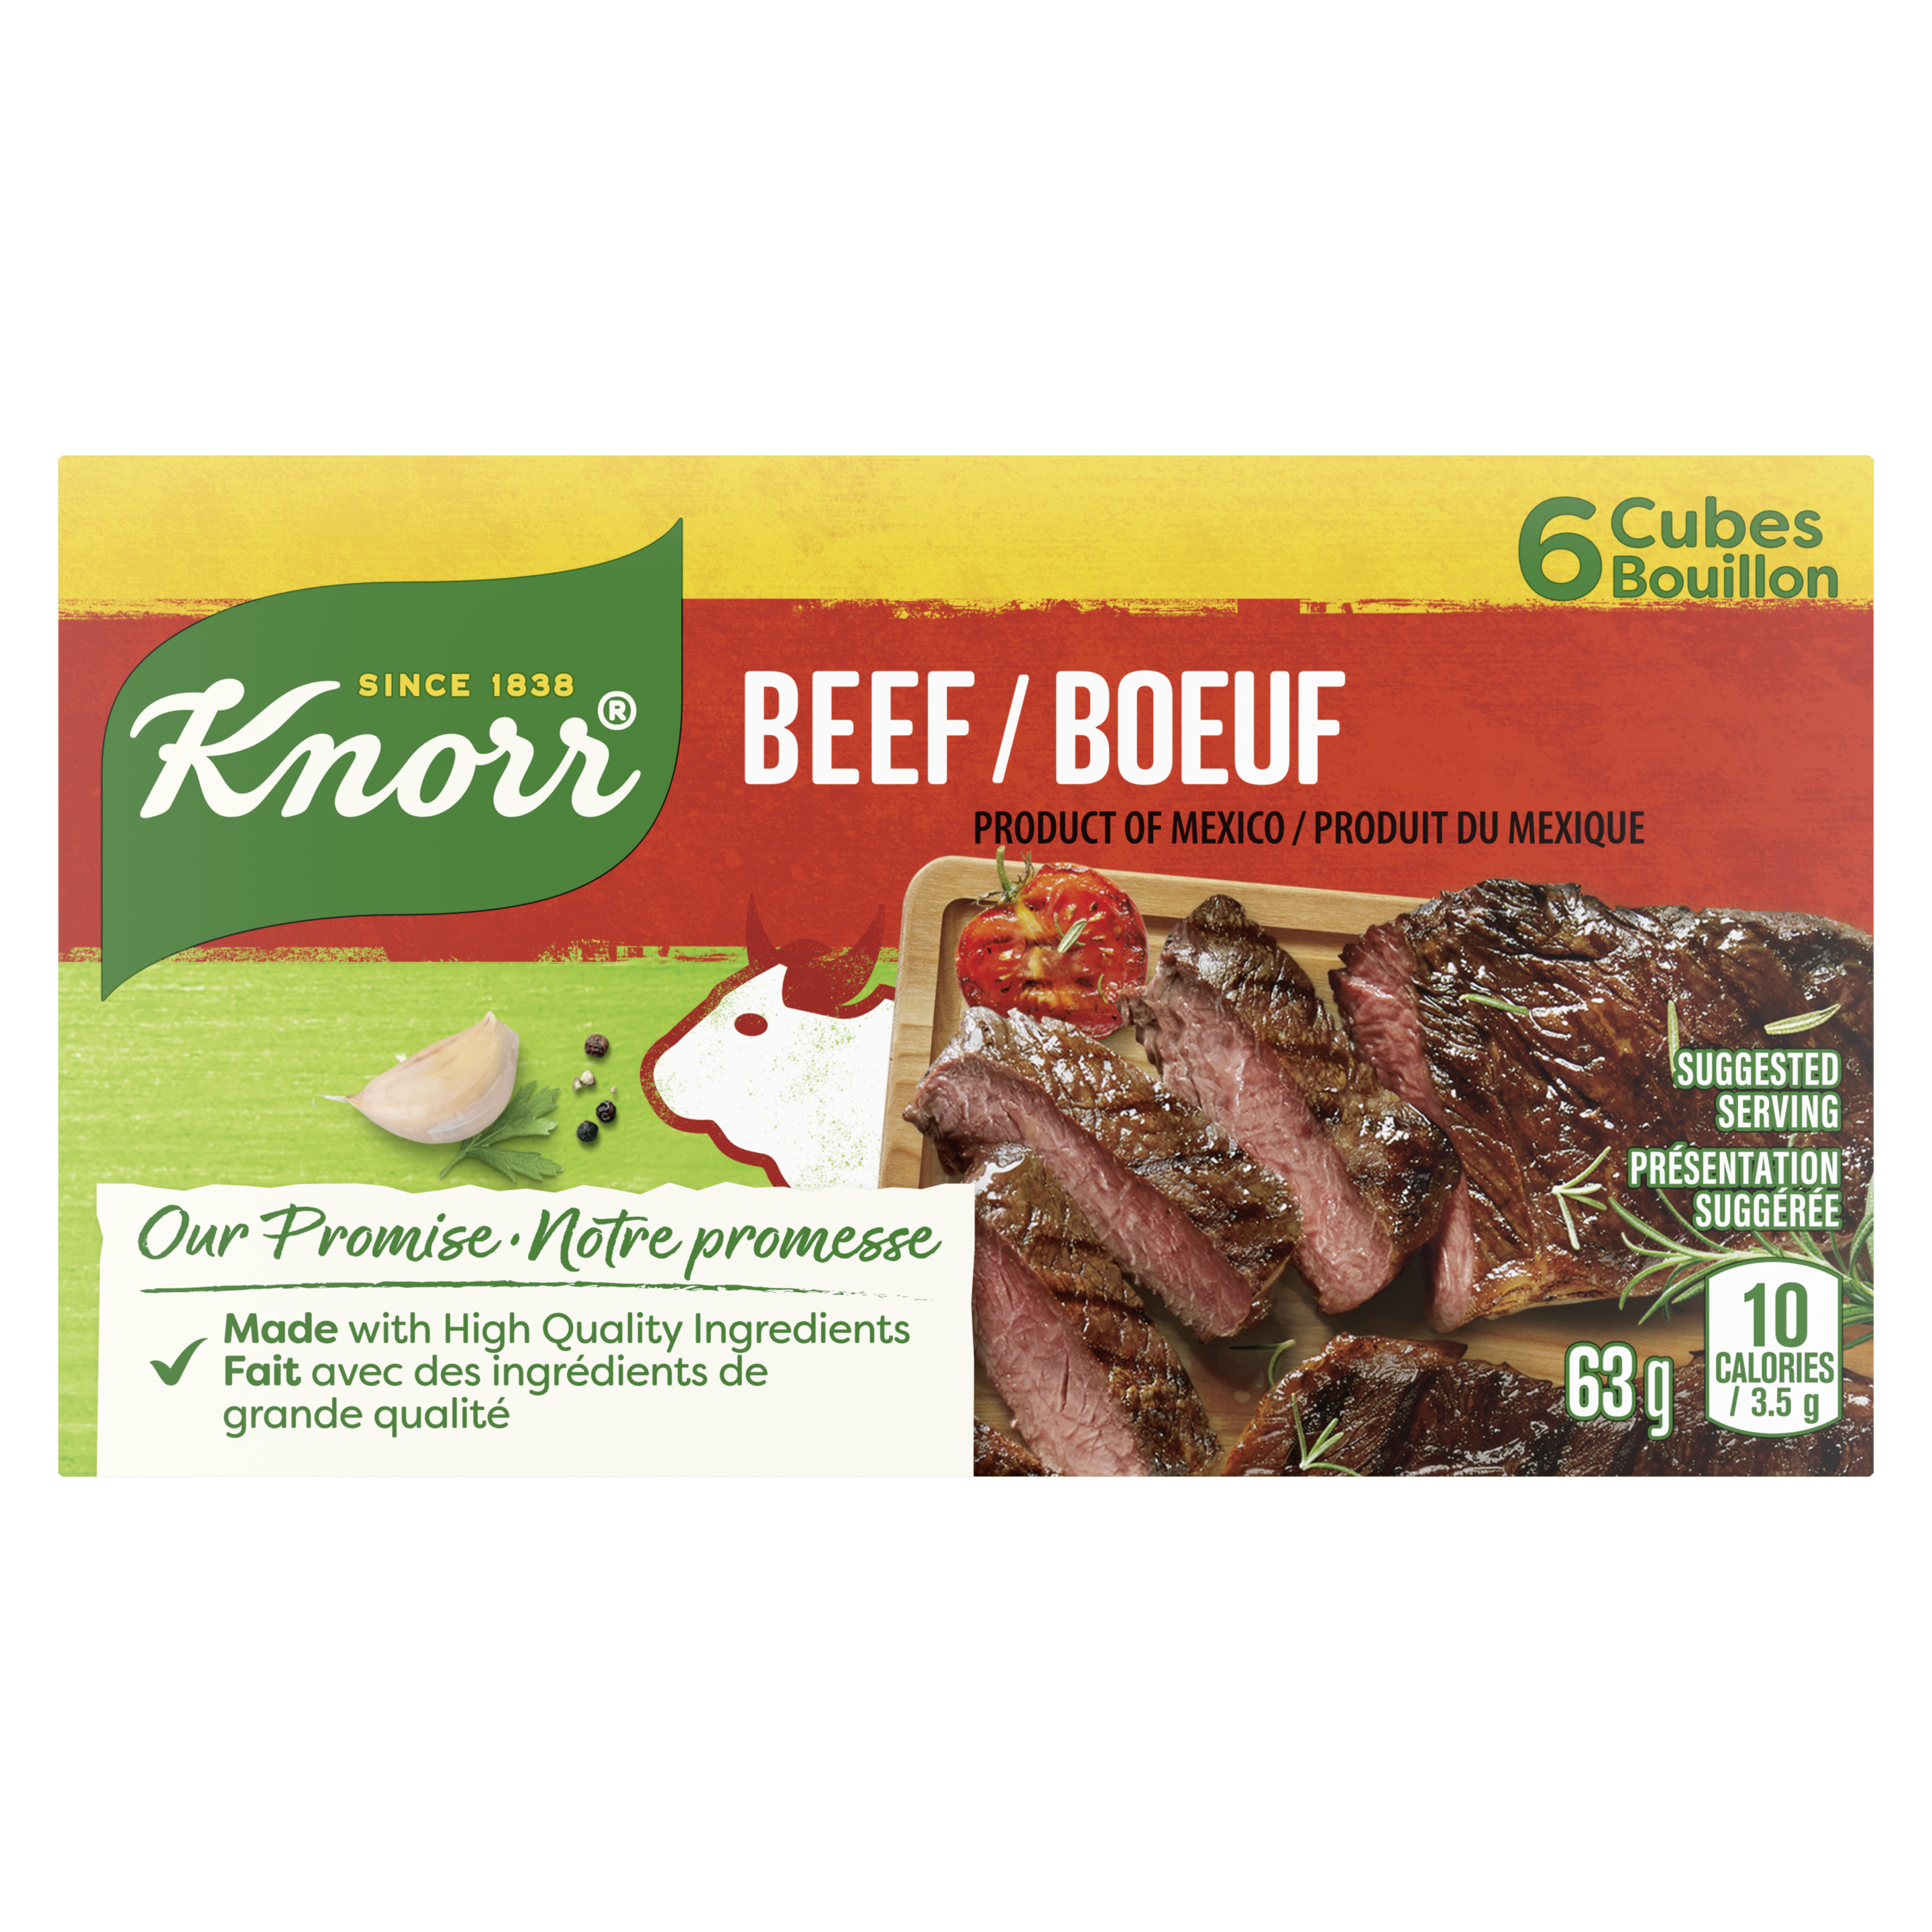 Knorr® Bouillon Beef Cube